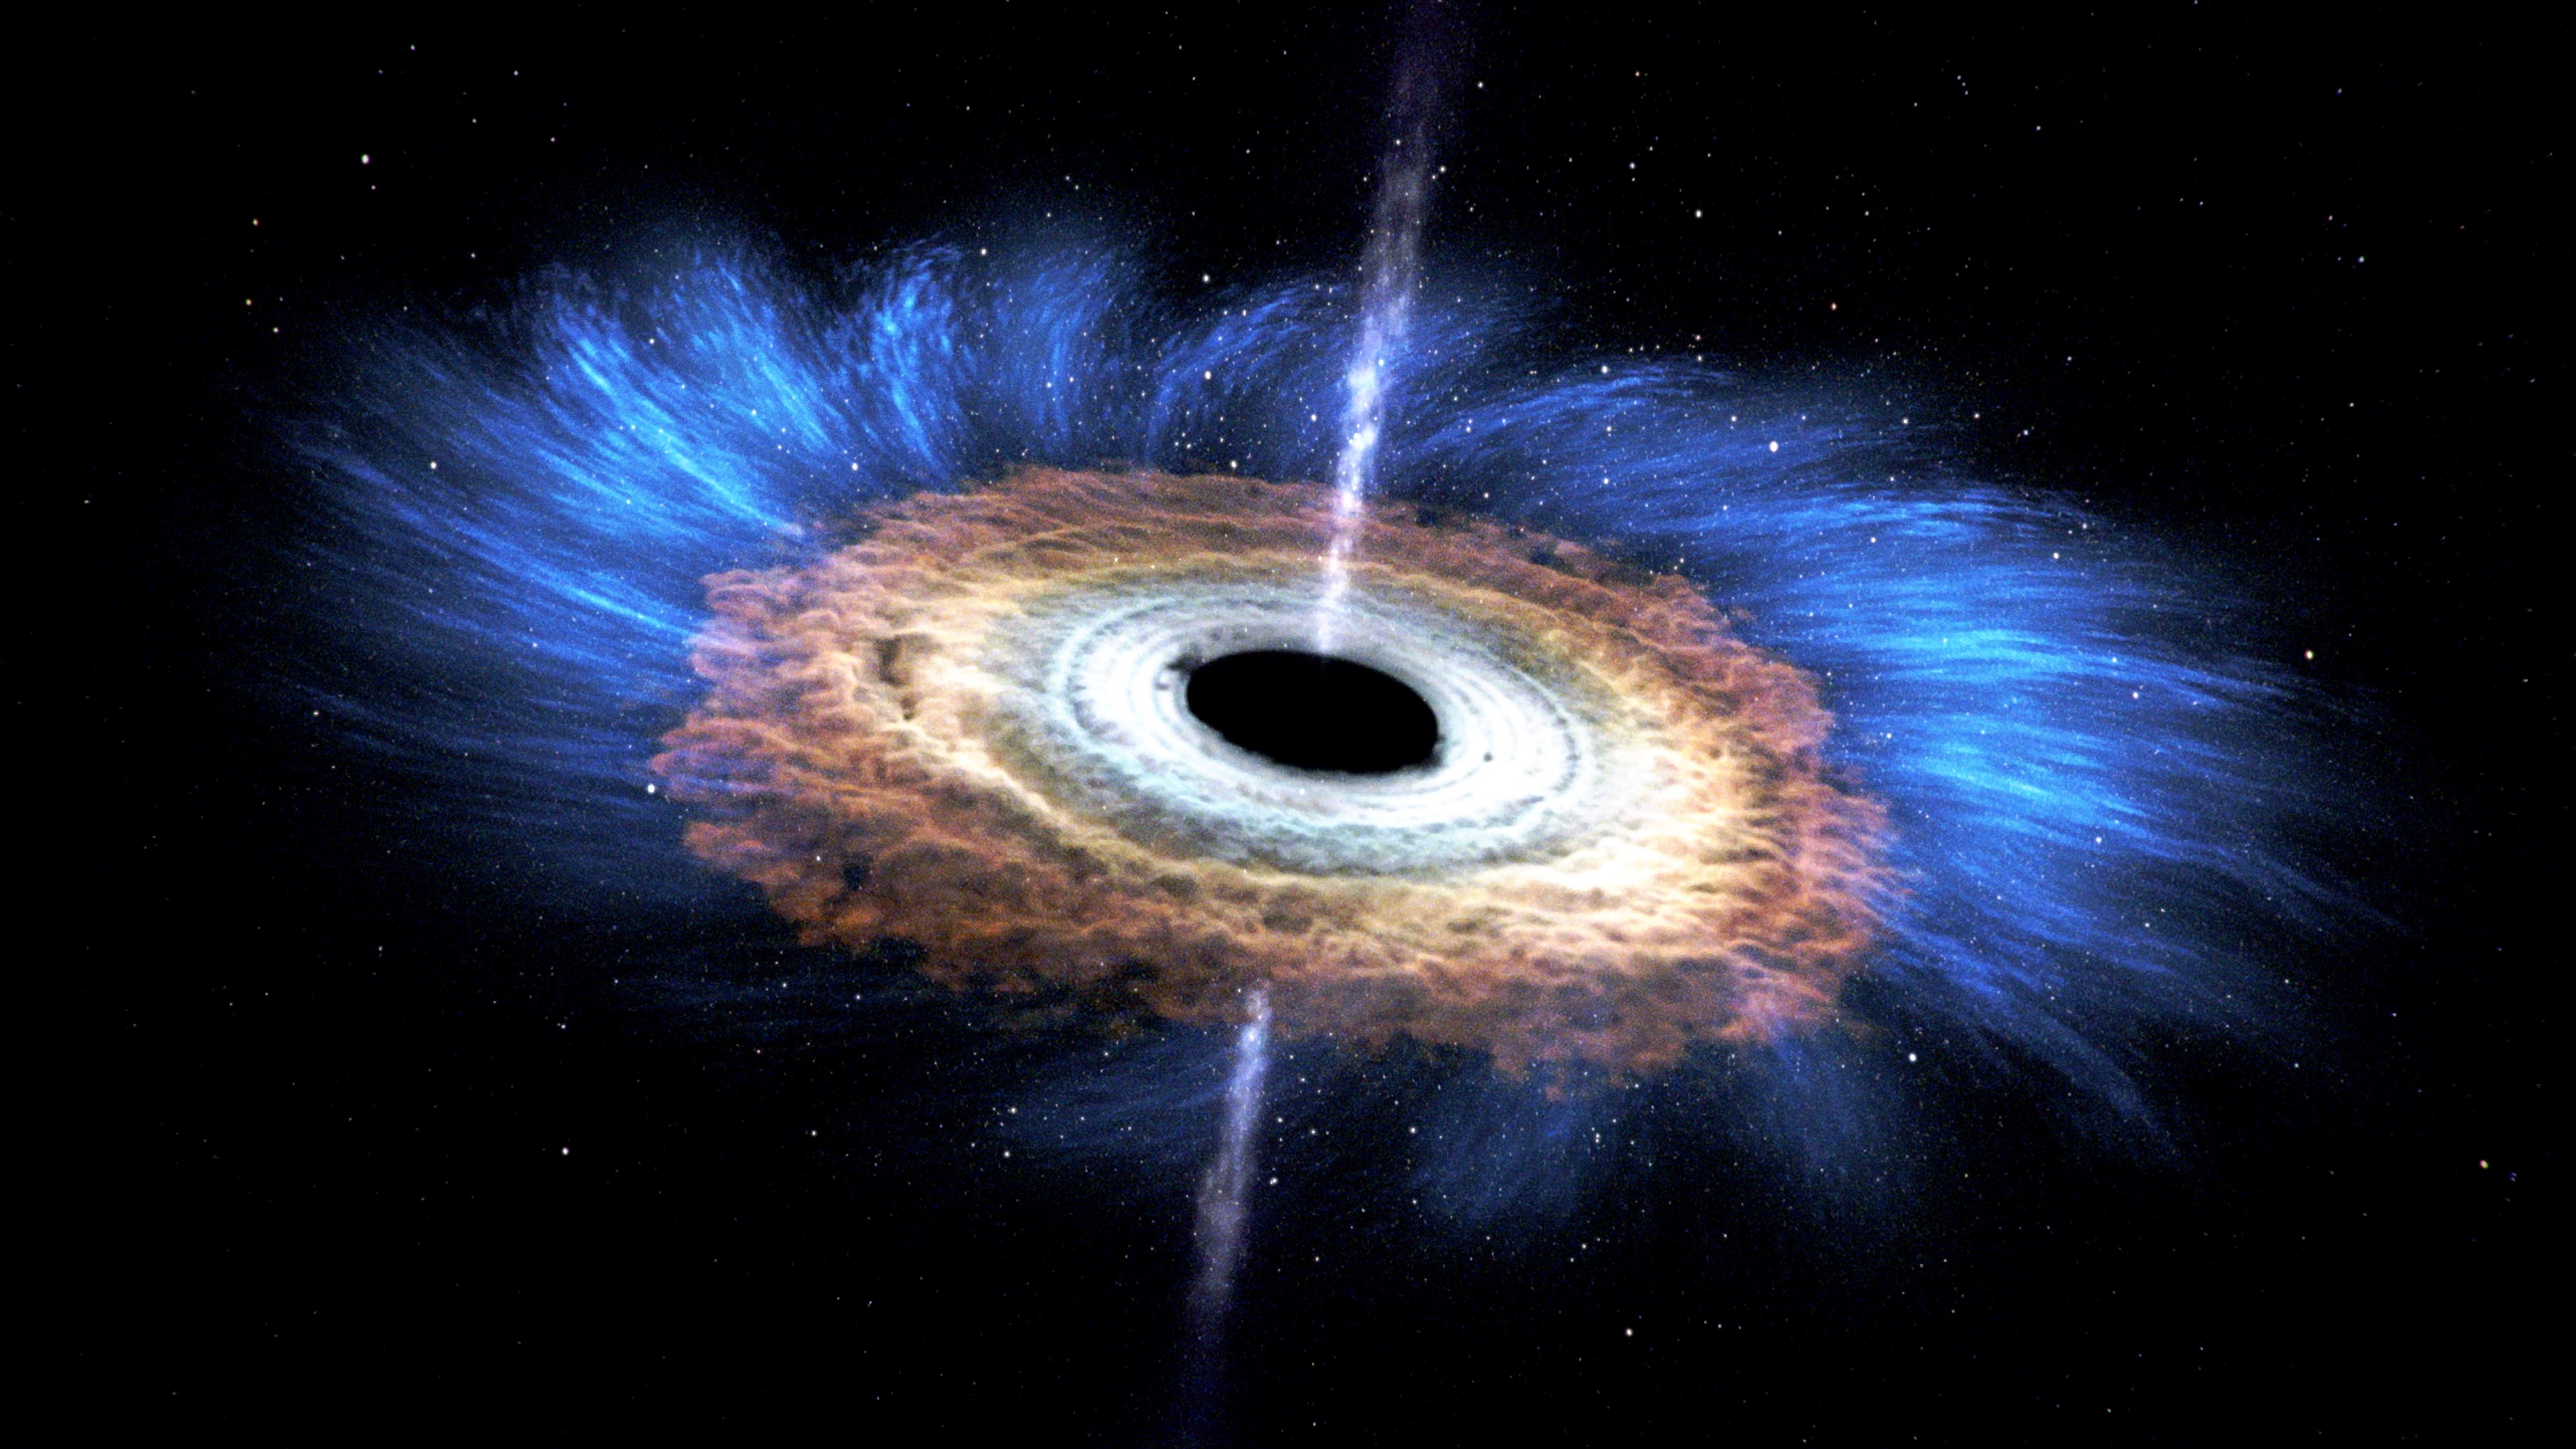 In our galaxy may be 100 million black holes